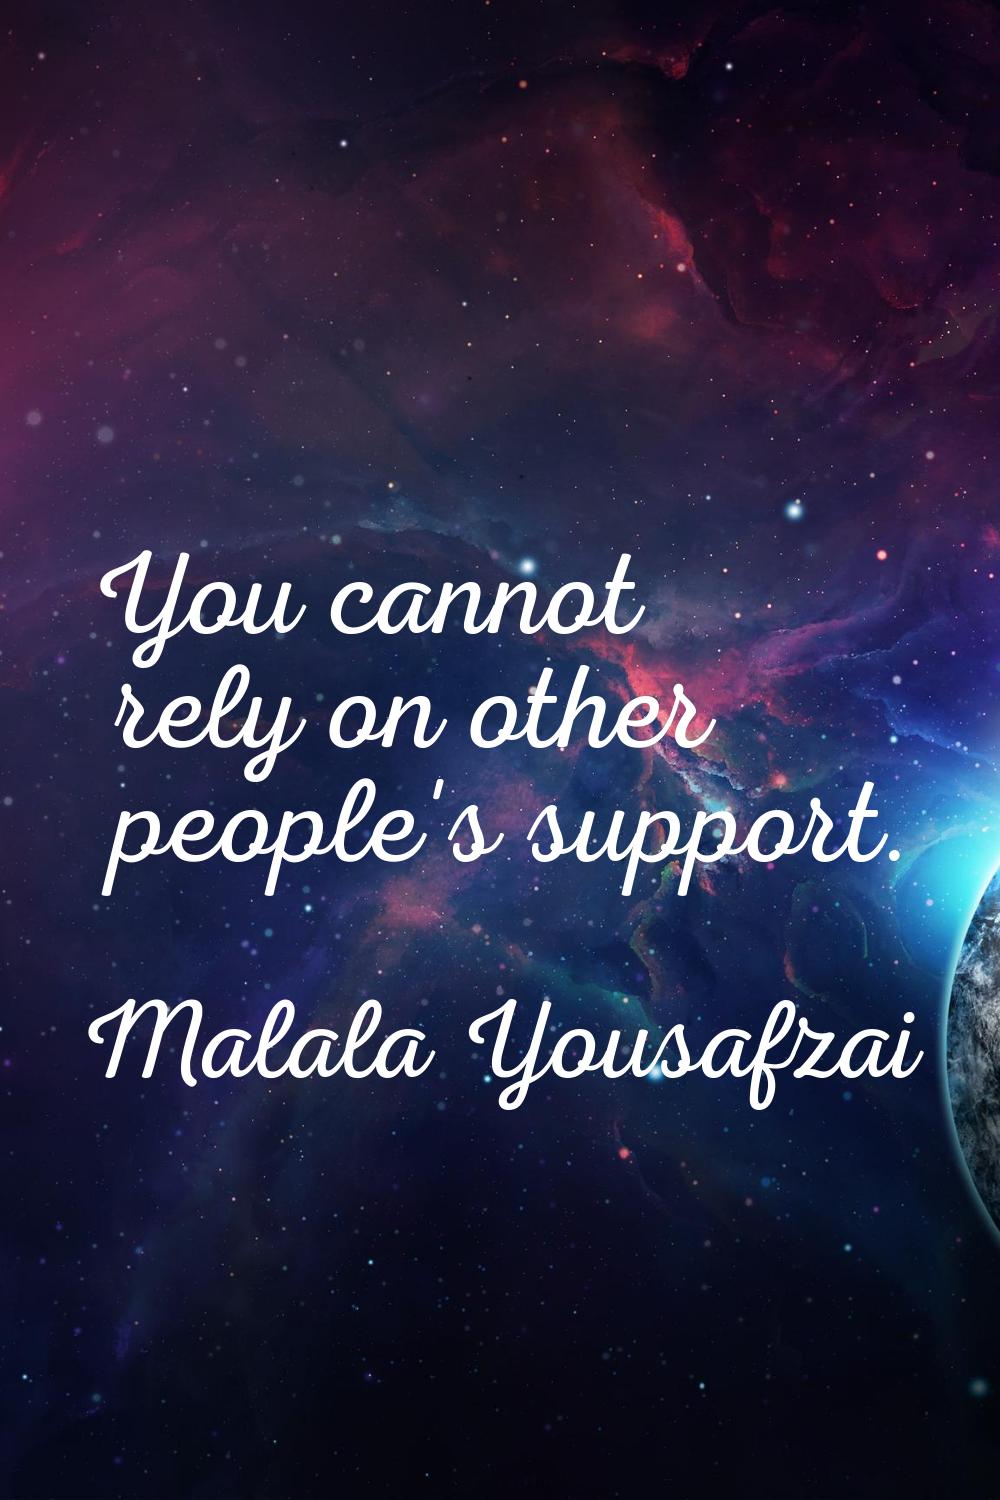 You cannot rely on other people's support.